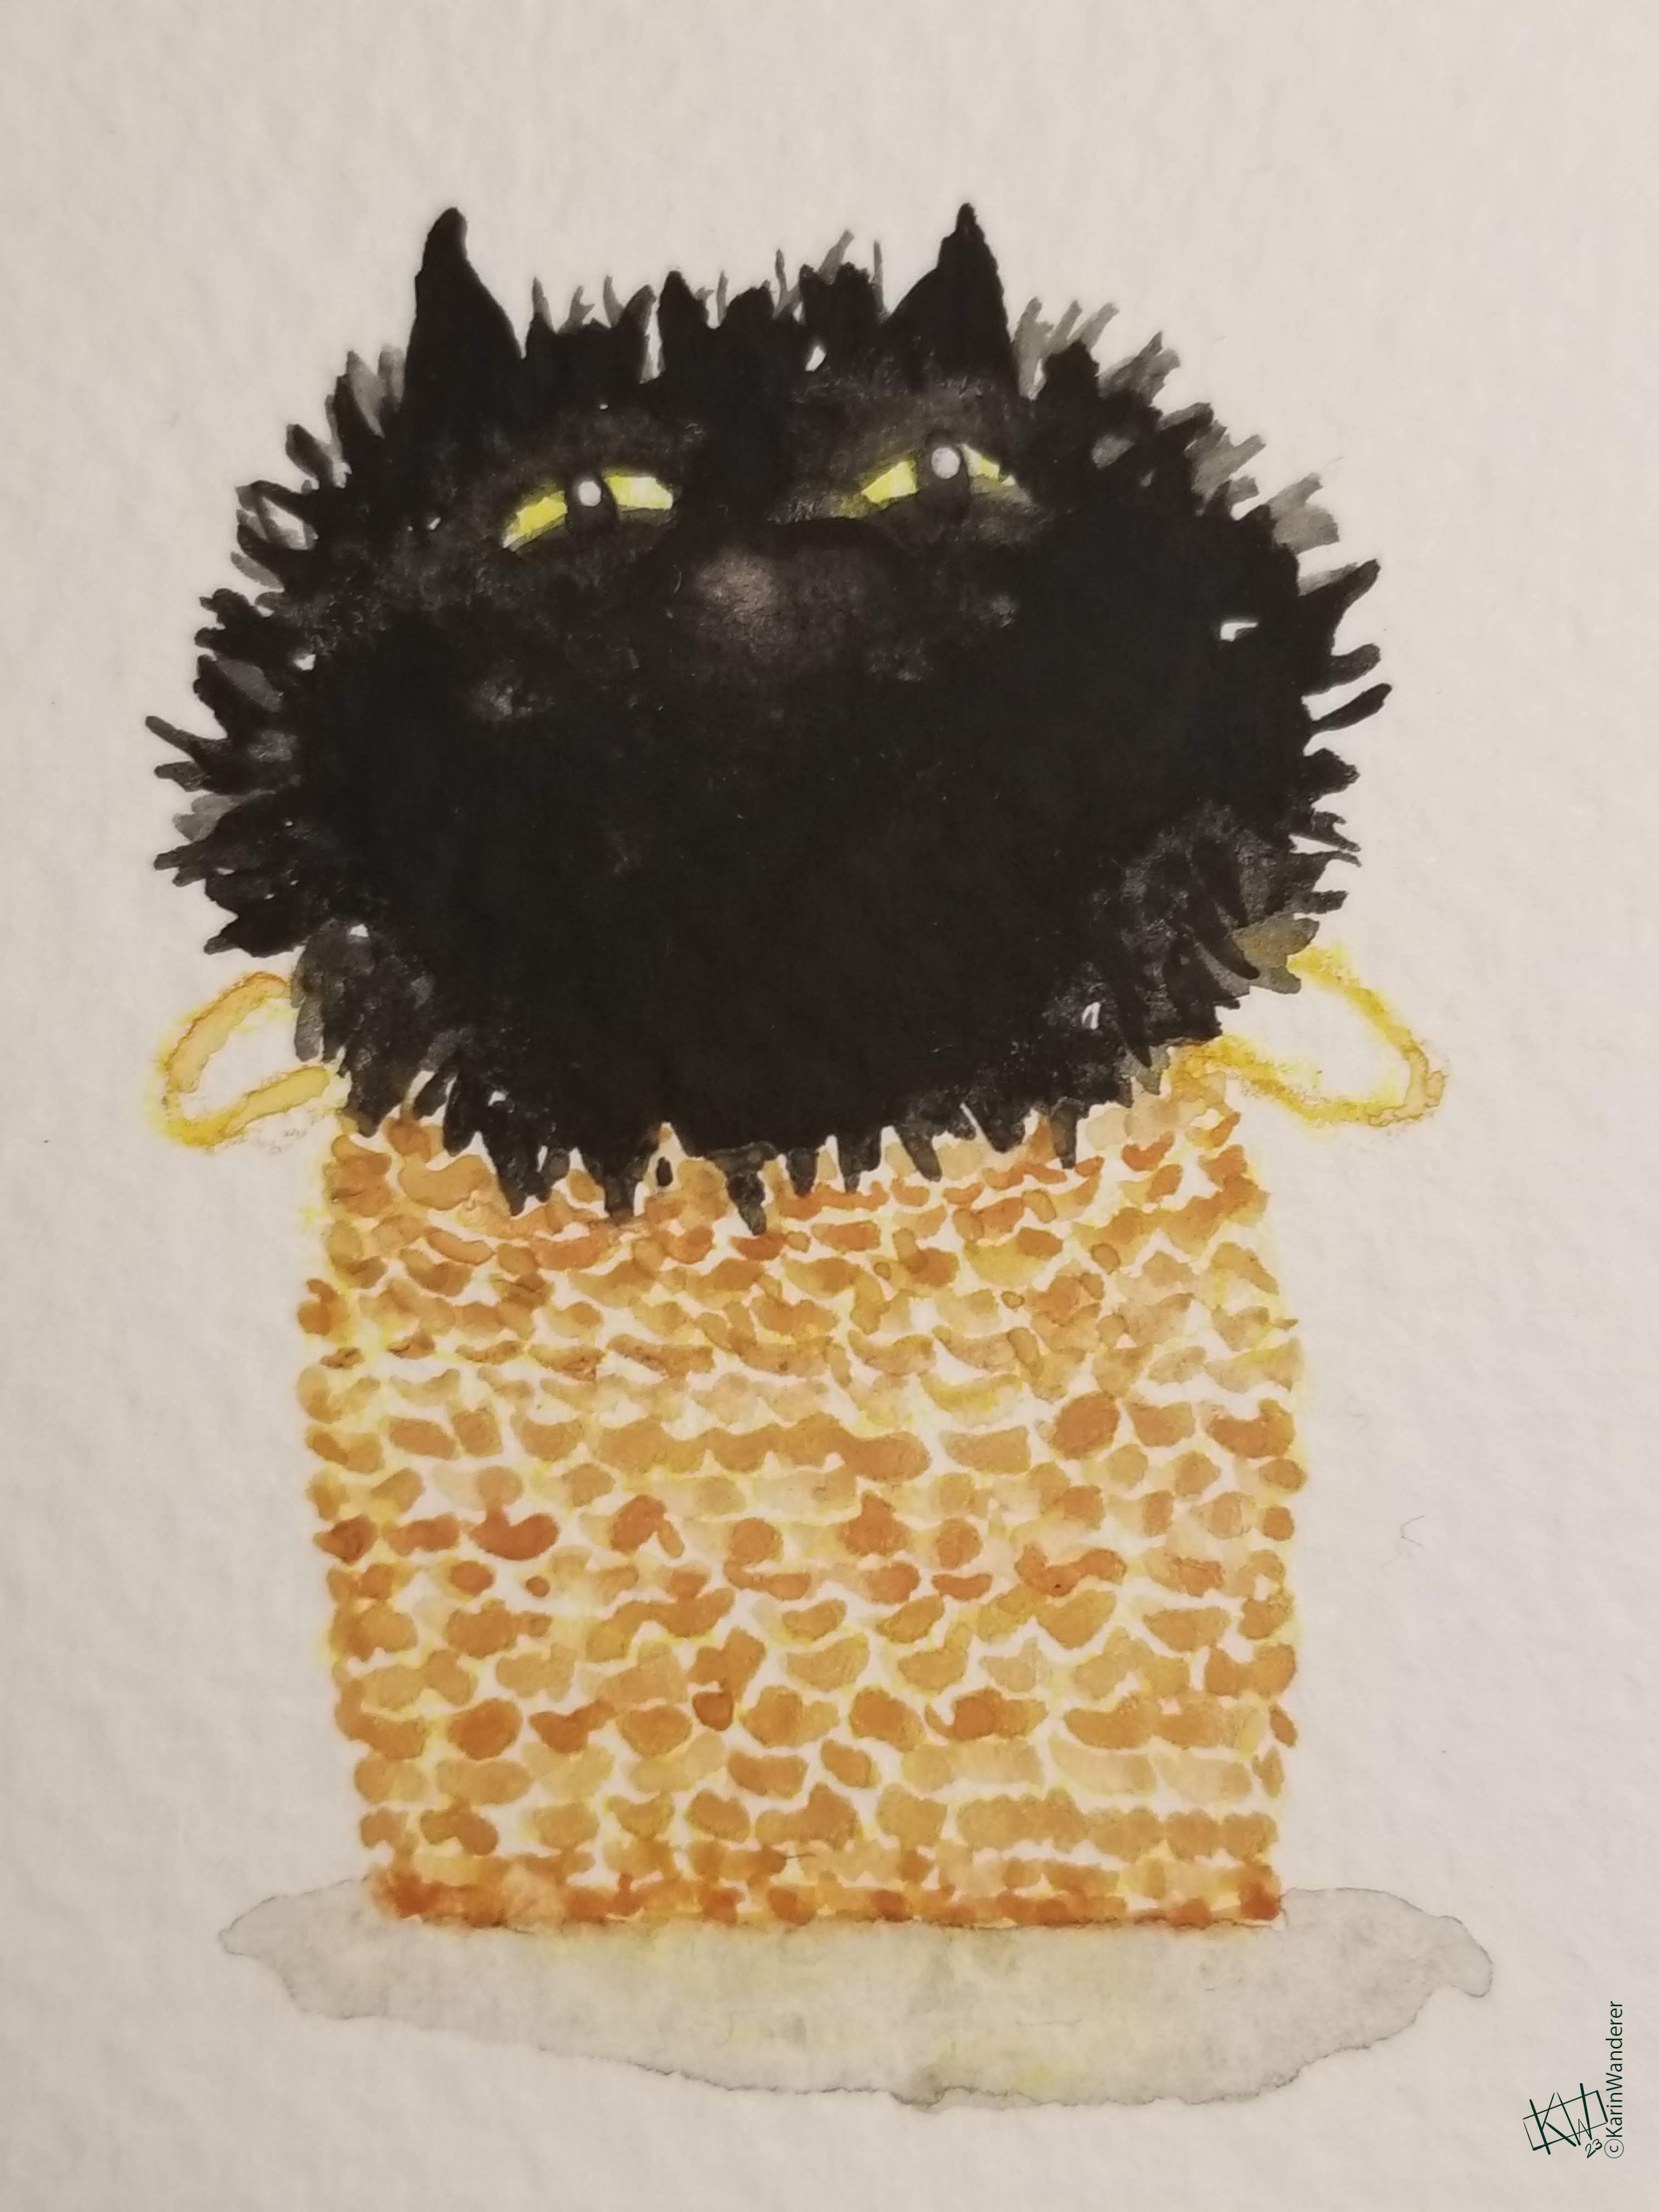 Watercolor of an incredibly fluffy black cat who has squished themselves into a basket, which pushes all the fluff up around their face.